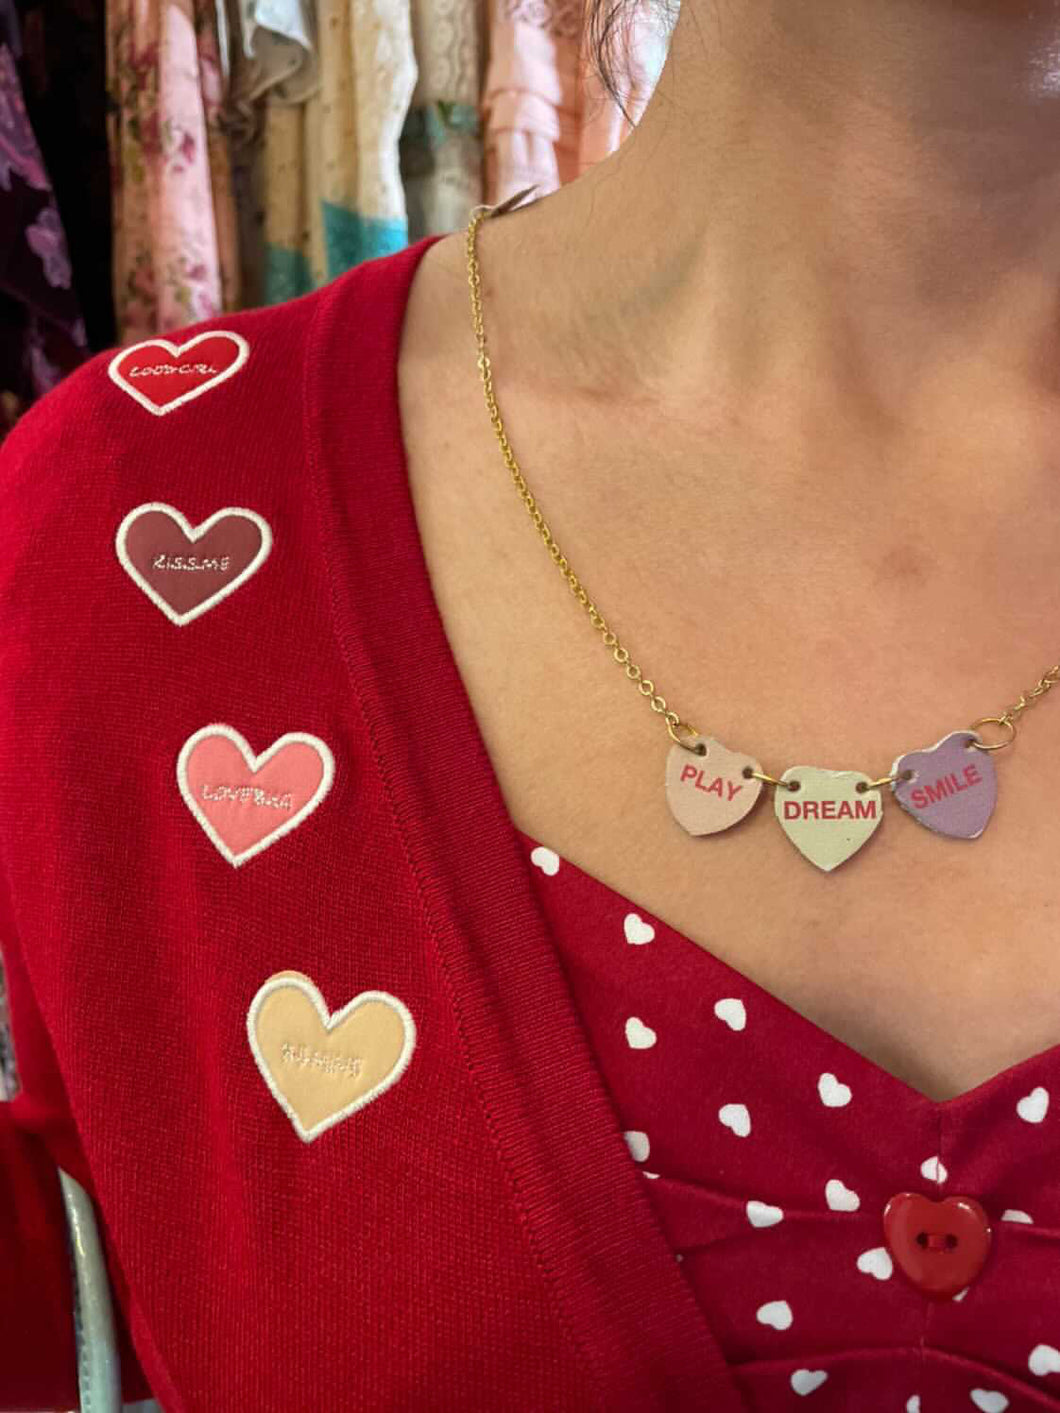 Leather Candy Heart Necklace